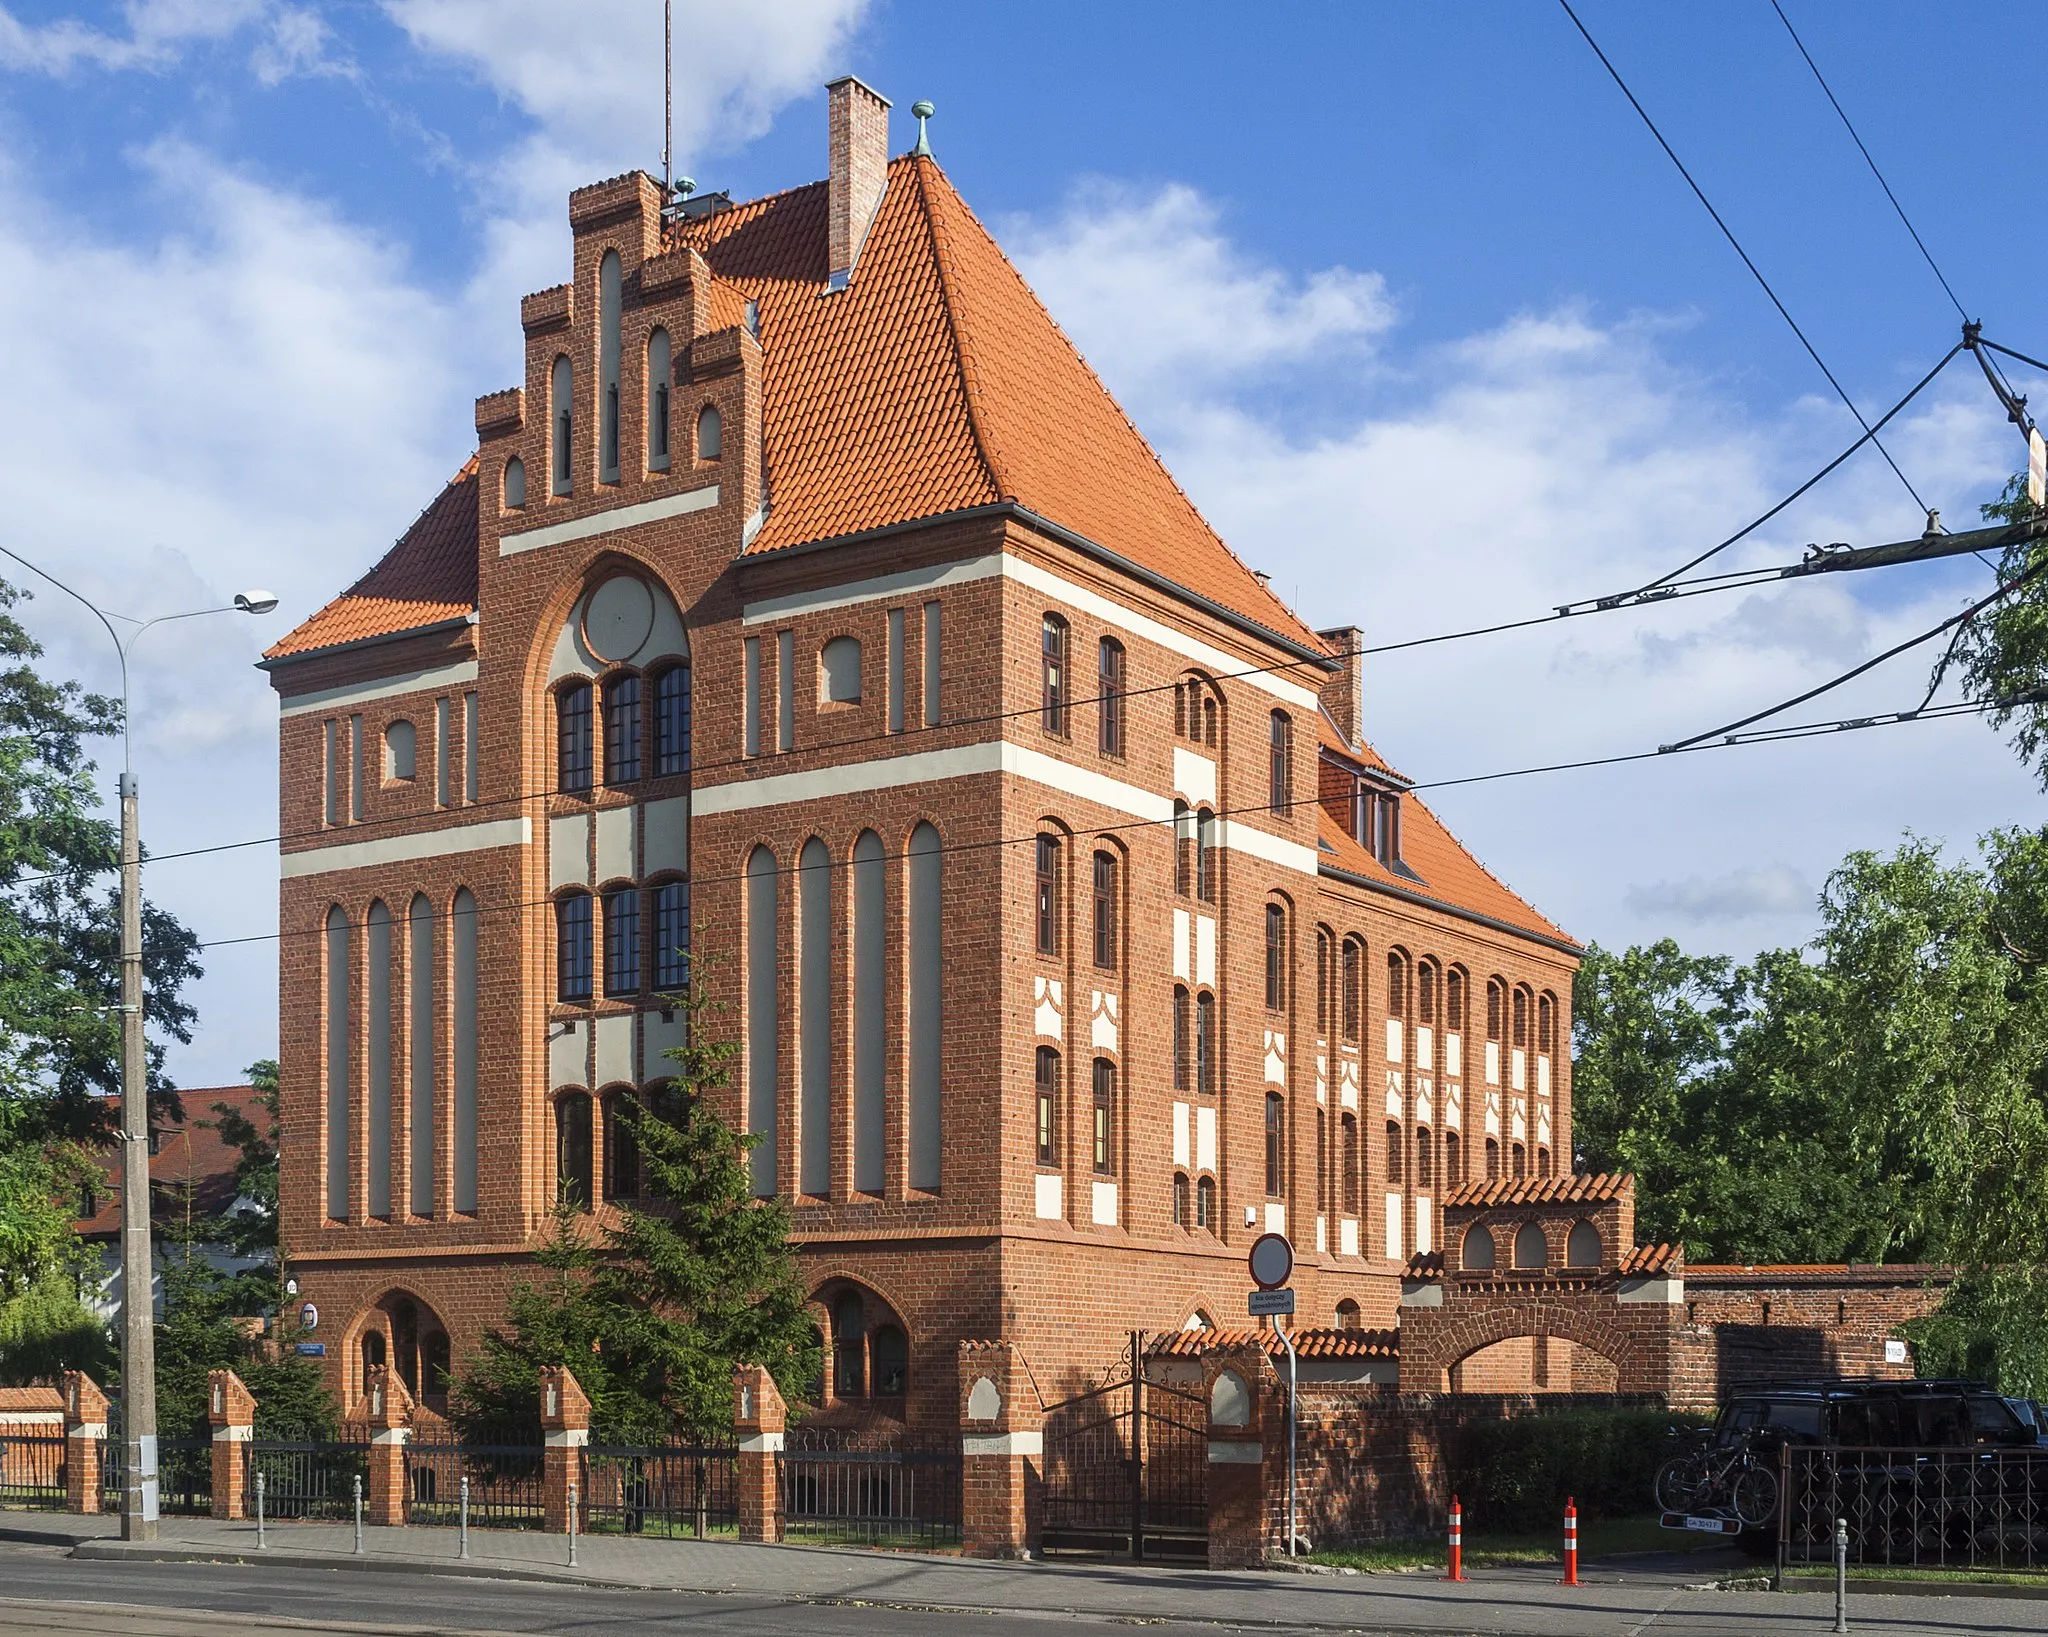 Photo showing: Building at 10 Wały Generała Sikorskiego in Toruń, former police station, nowadays town council department.